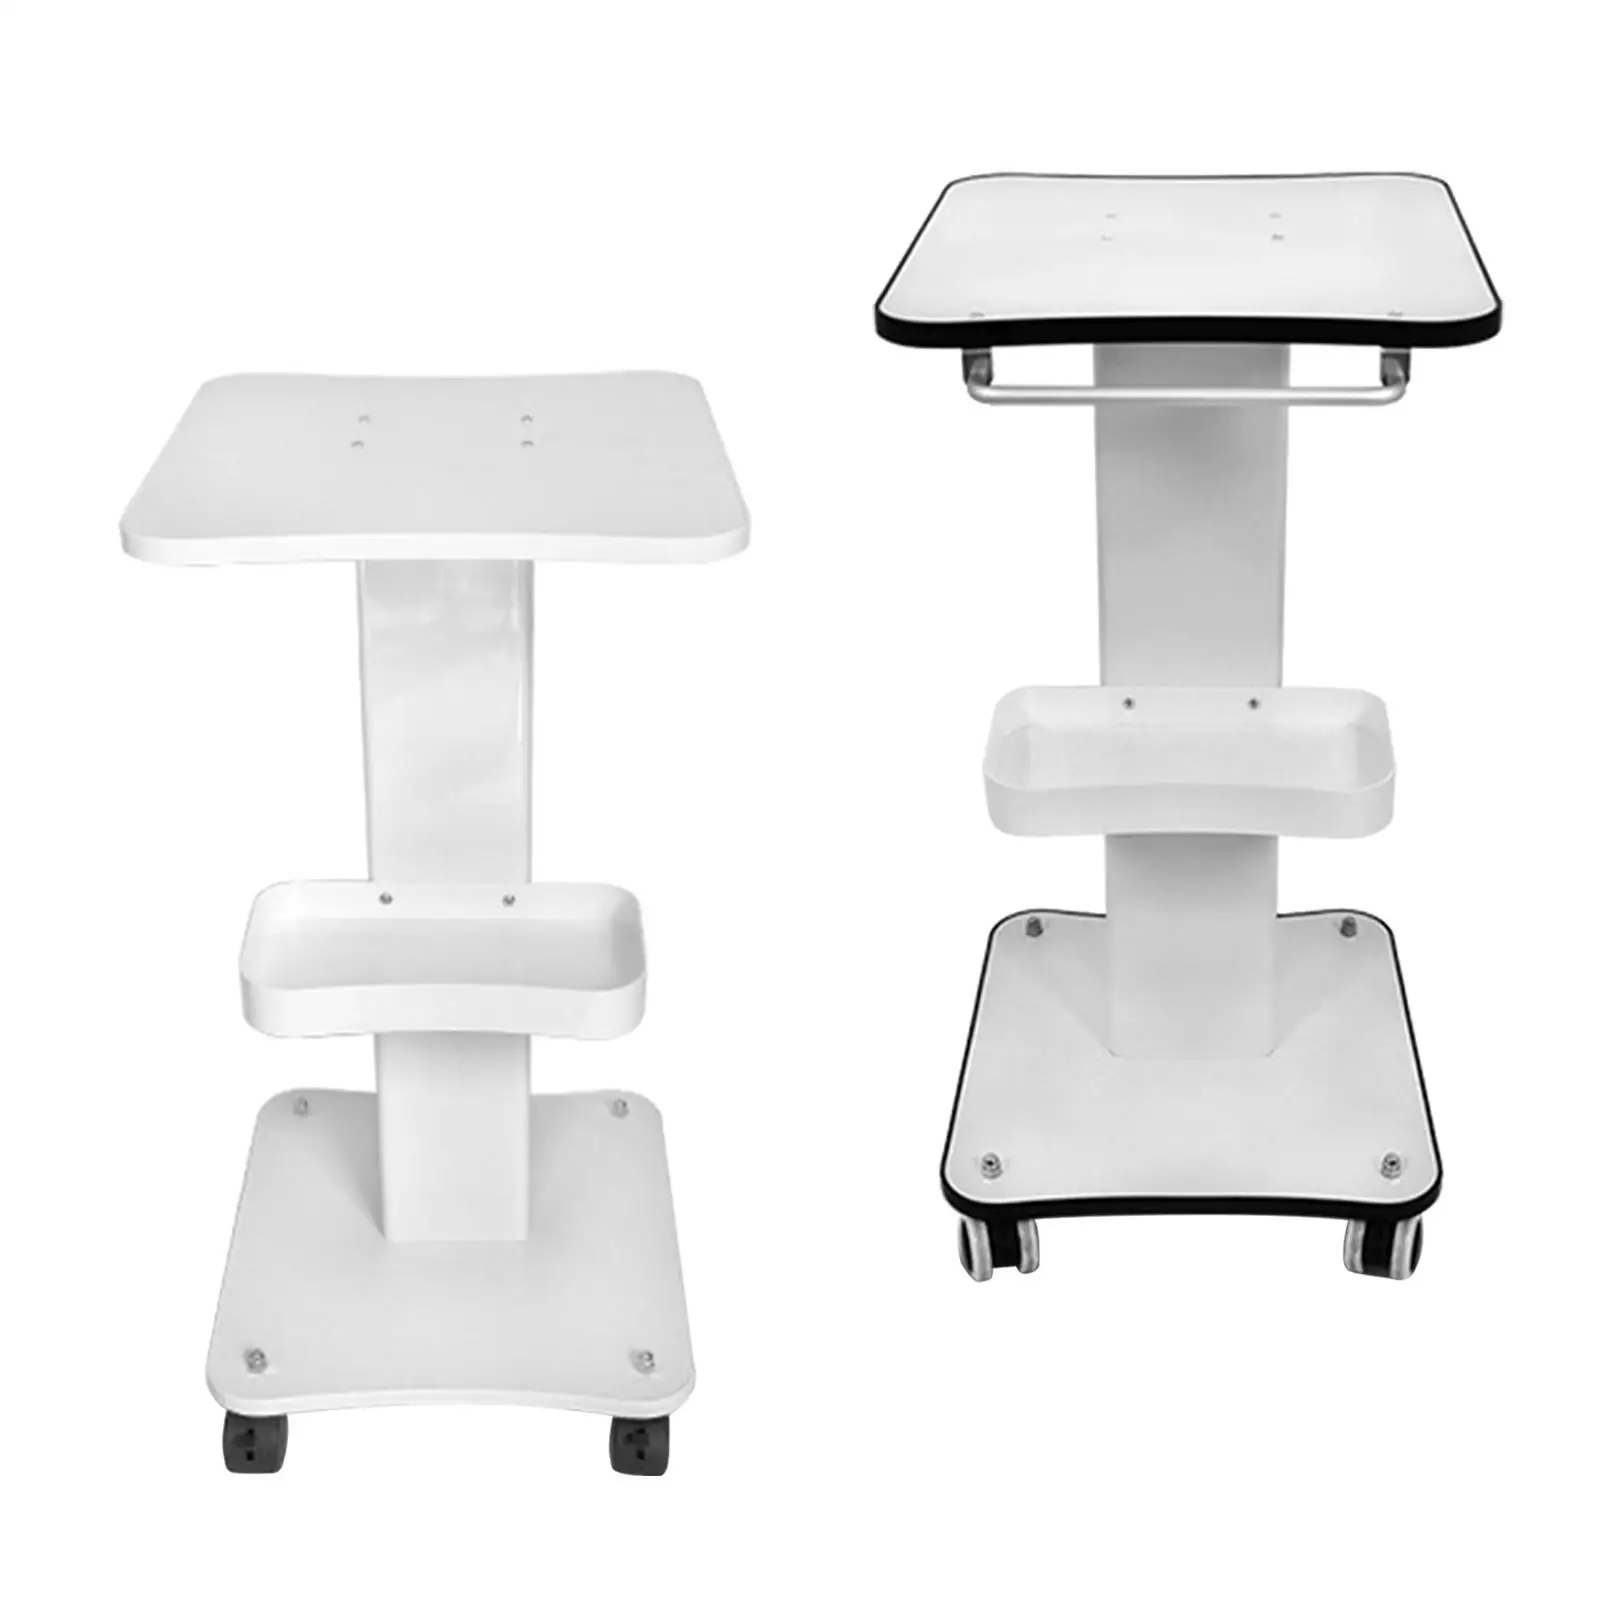 Beauty-Instruments-Cart-Salon-Trolley-Portable-Space-Saving-Table-Work-Stations-3-Tier-Beauty-Rolling-Cart-2